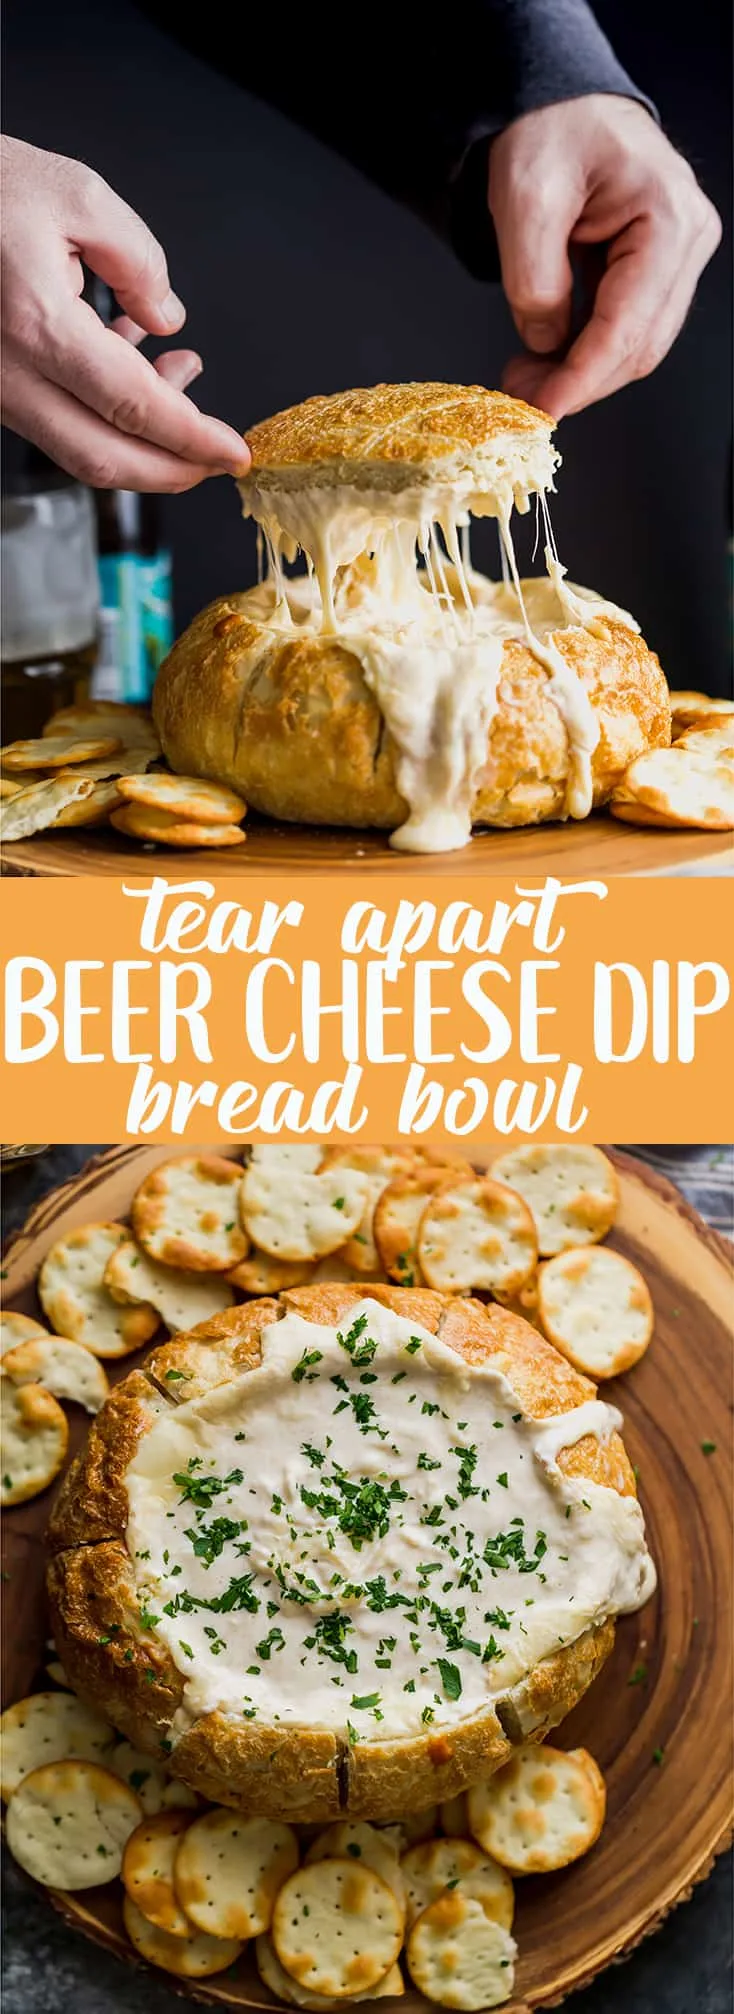 Pinterest collage image with text "tear apart beer cheese dip bread bowl"